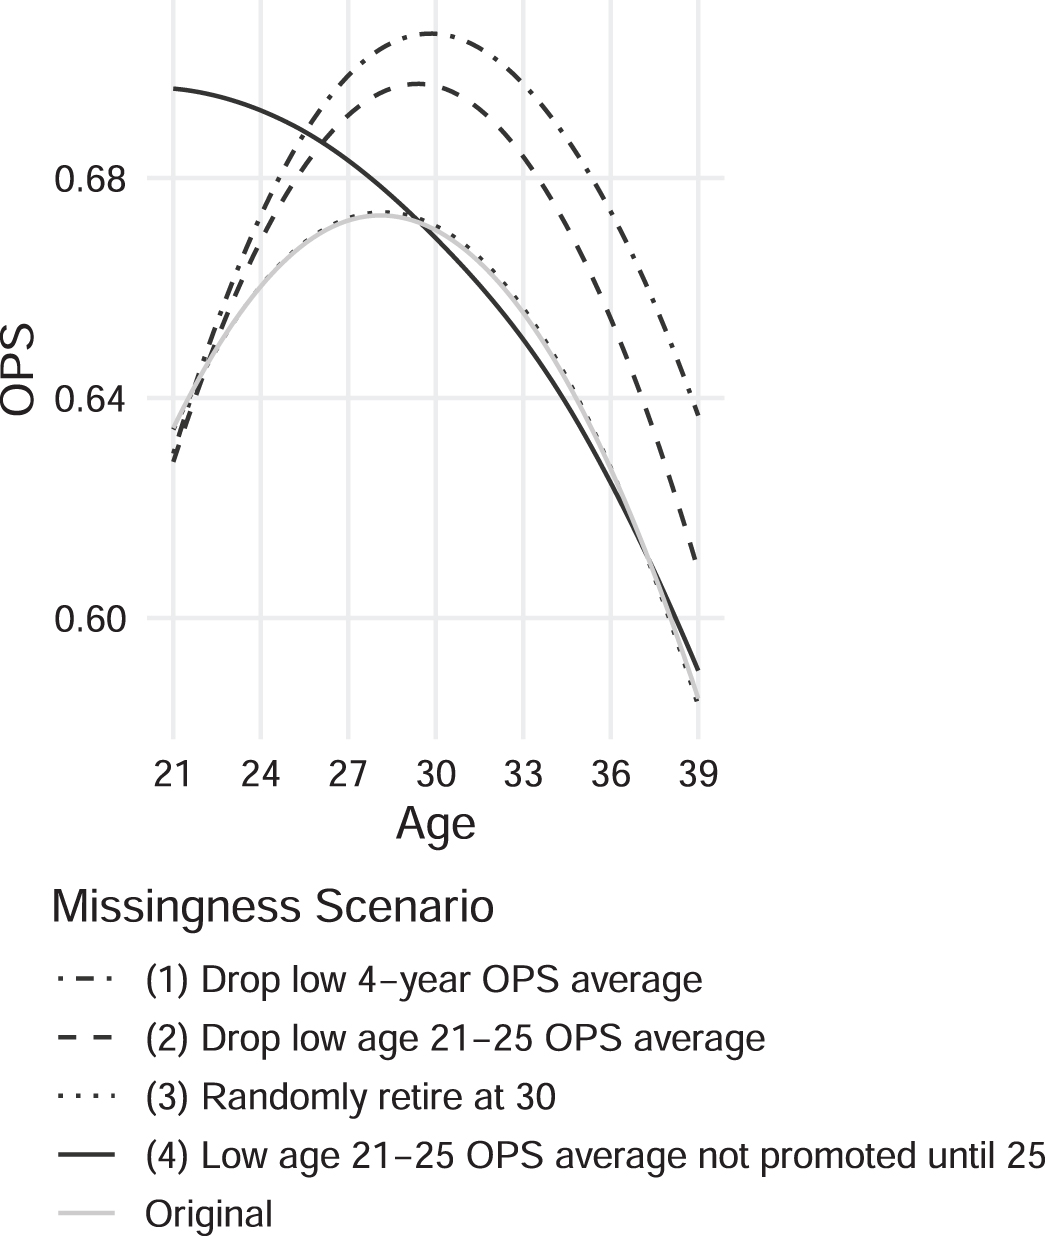 Comparison of the average aging curves constructed with the full simulated data and different cases of dropouts (without imputation). The dropout mechanisms presented are (1) dropping players with any 4-year OPS average below 0.55; (2) dropping players with OPS average between age 21 and 25 of less than 0.55; (3) randomly removing 25% of the players at age 30; and (4) players with low OPS average between age 21 and 25 are not being promoted until age 25. Results shown here are for 1,000 player-careers generated from simulation.